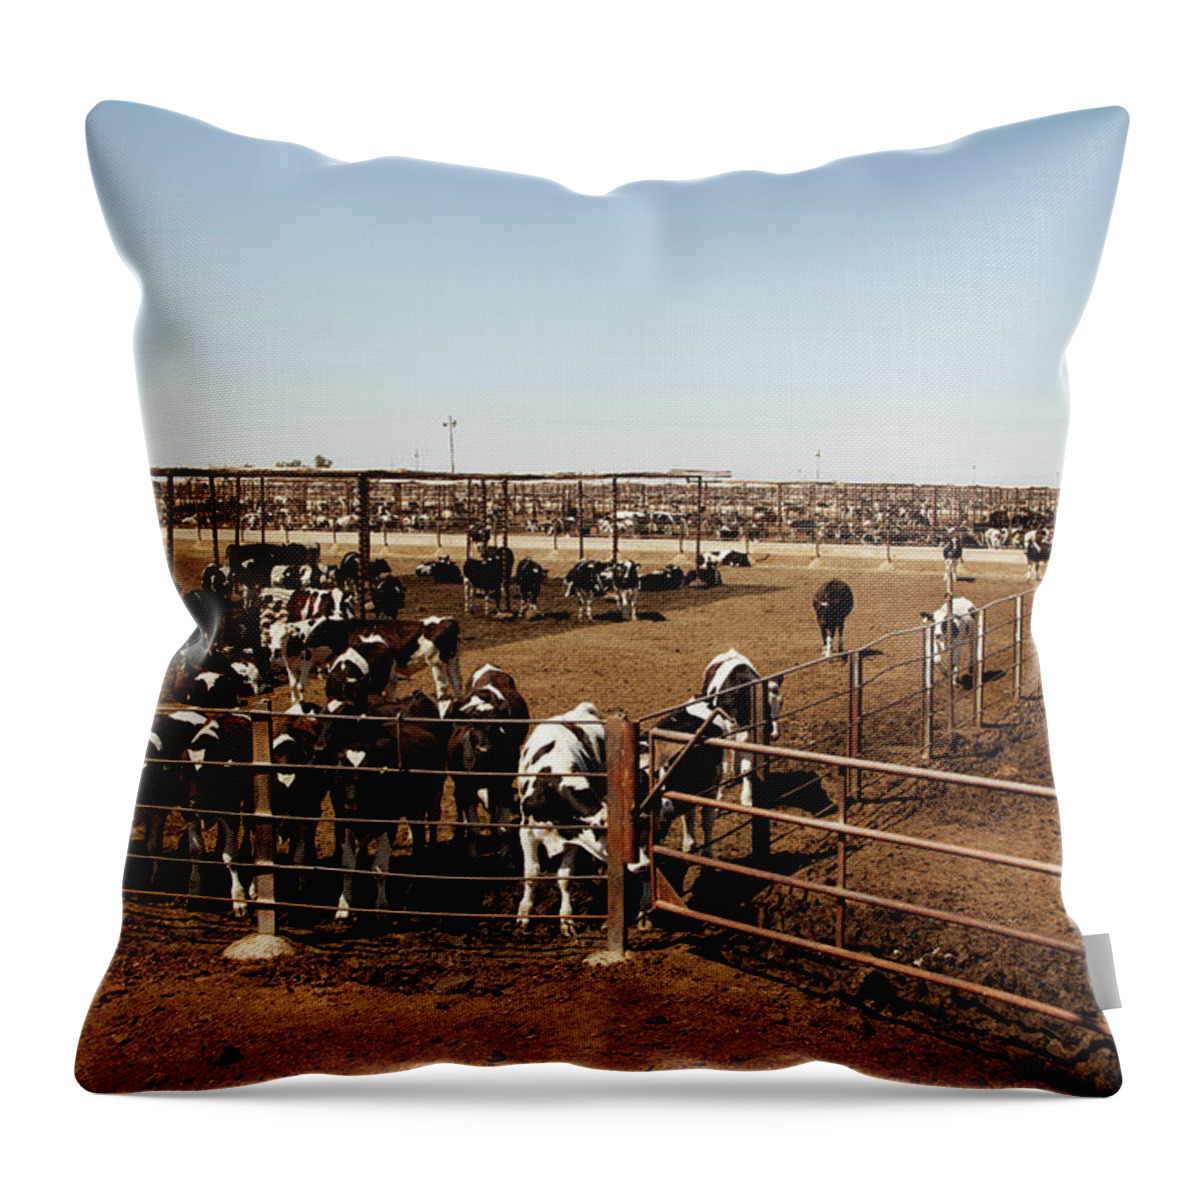 Animal Themes Throw Pillow featuring the photograph Cattle #1 by Simon Willms